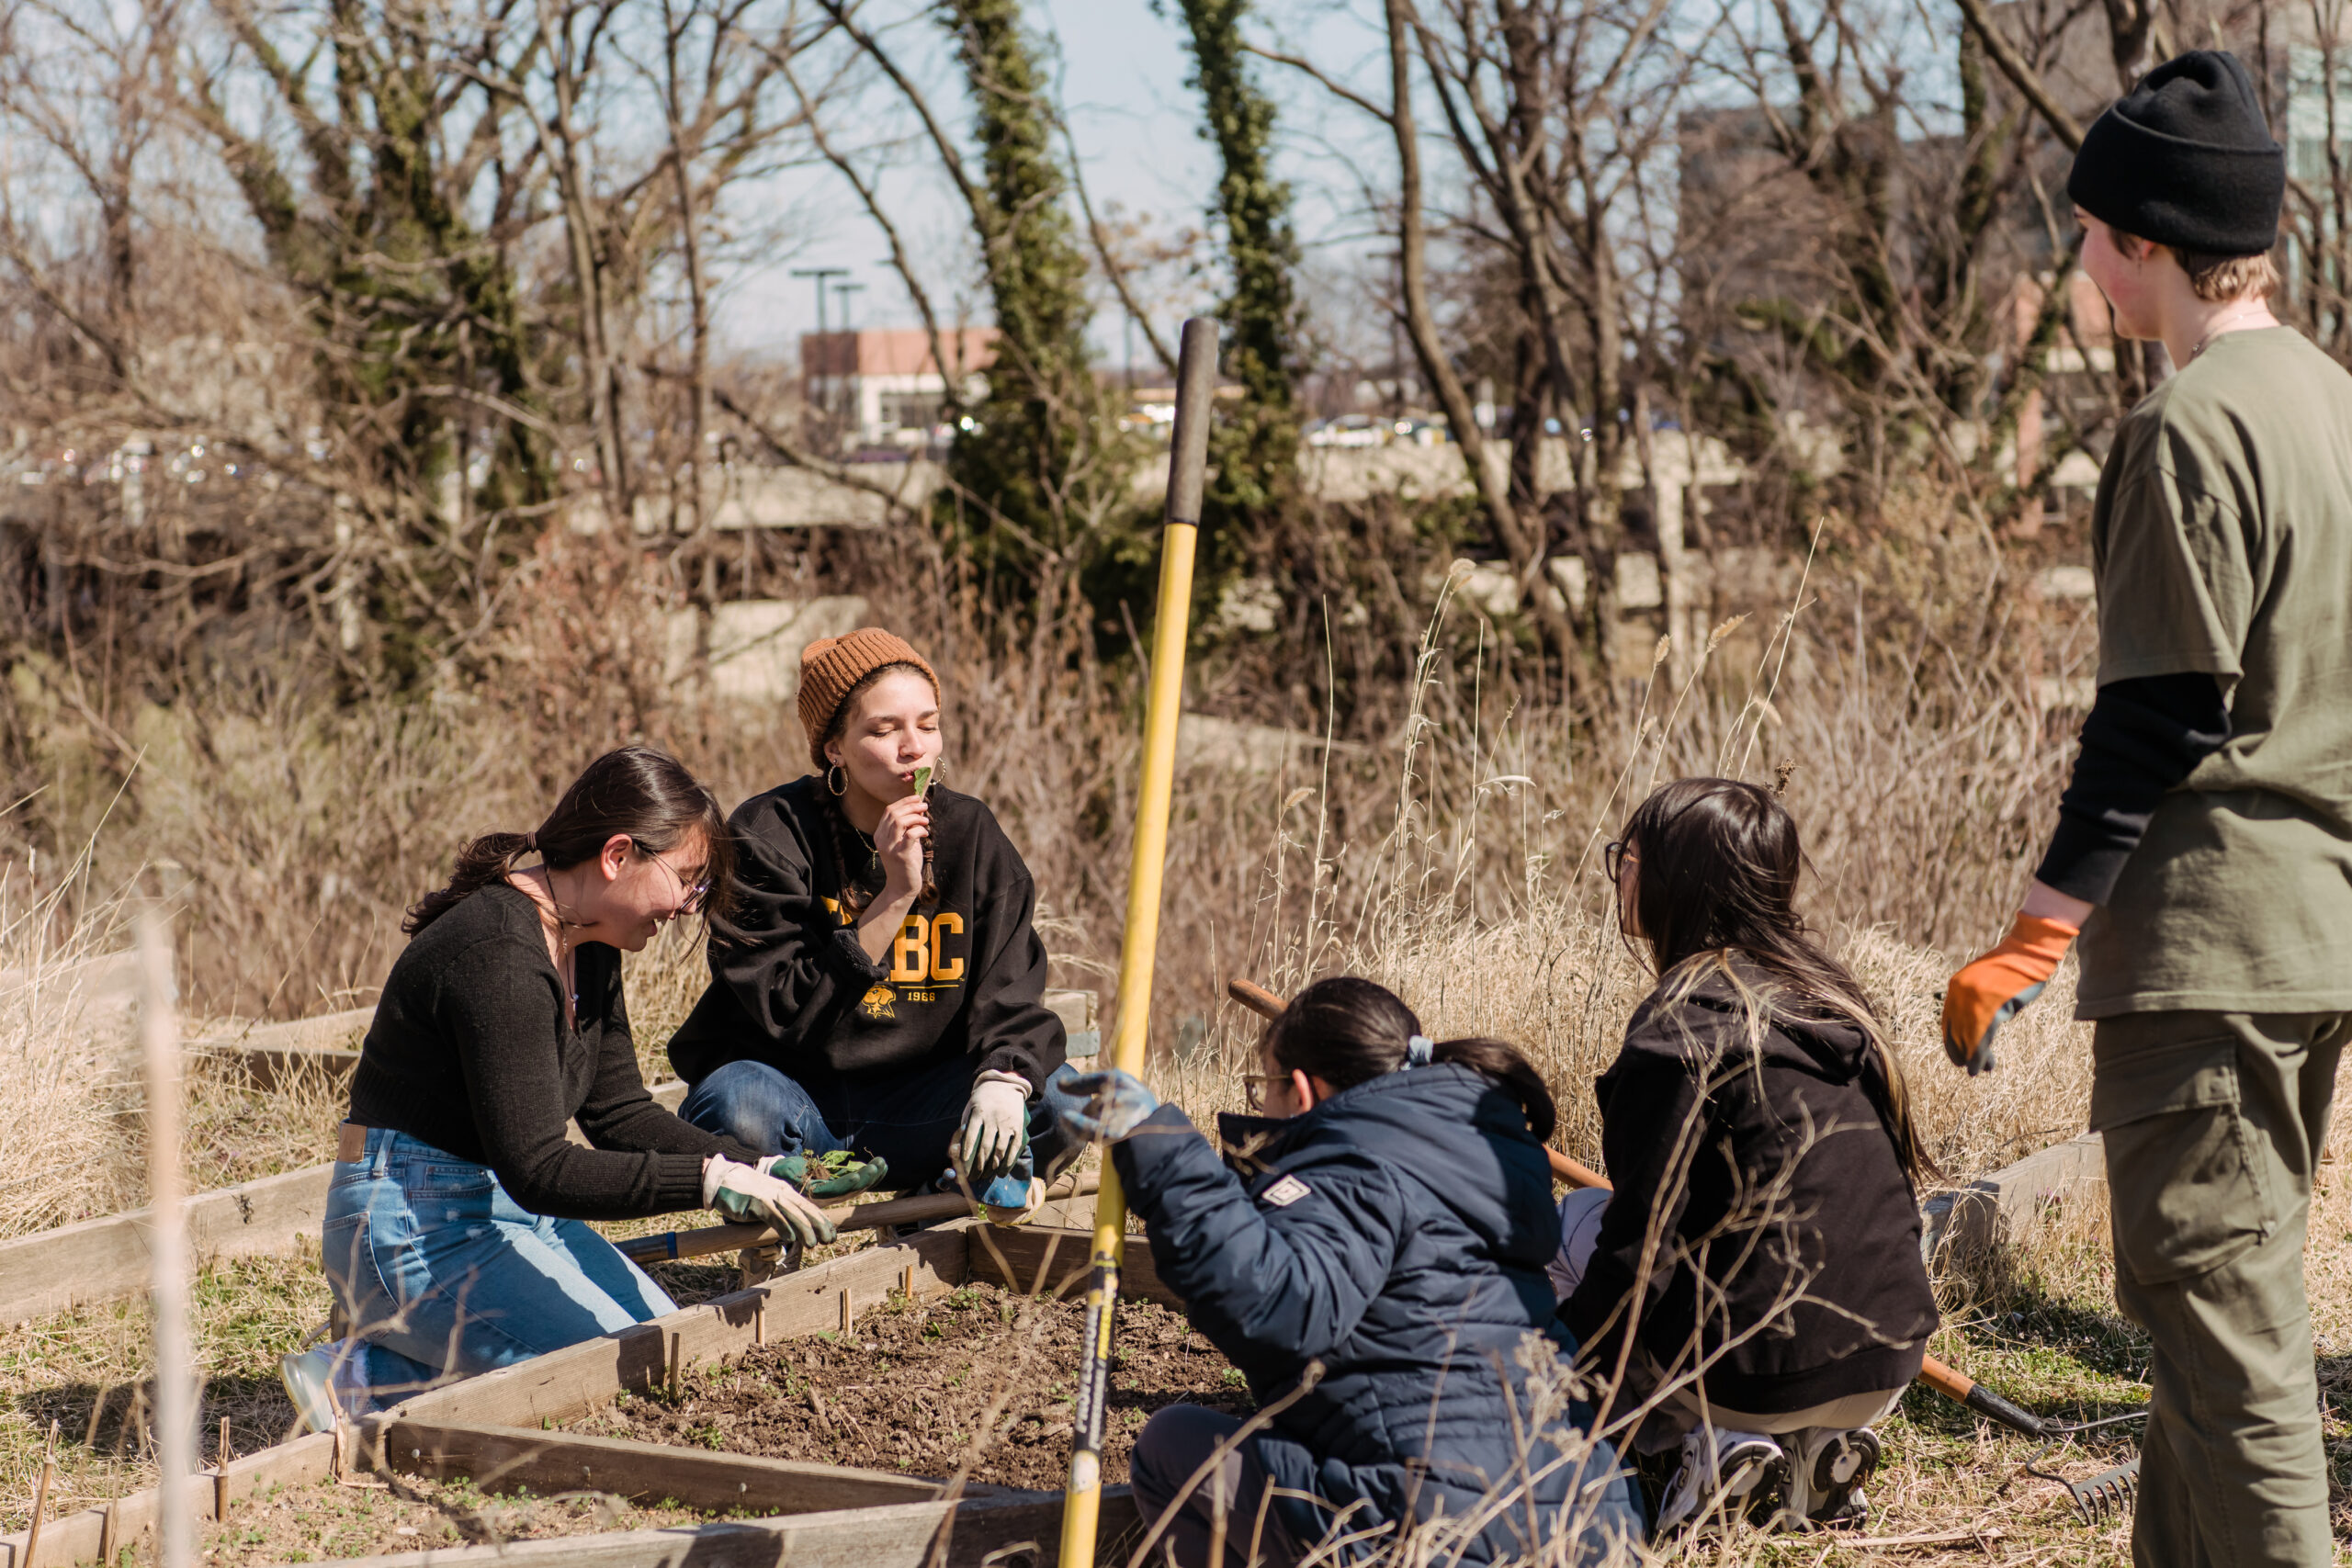 a group of young people gather around a garden plot, working the soil